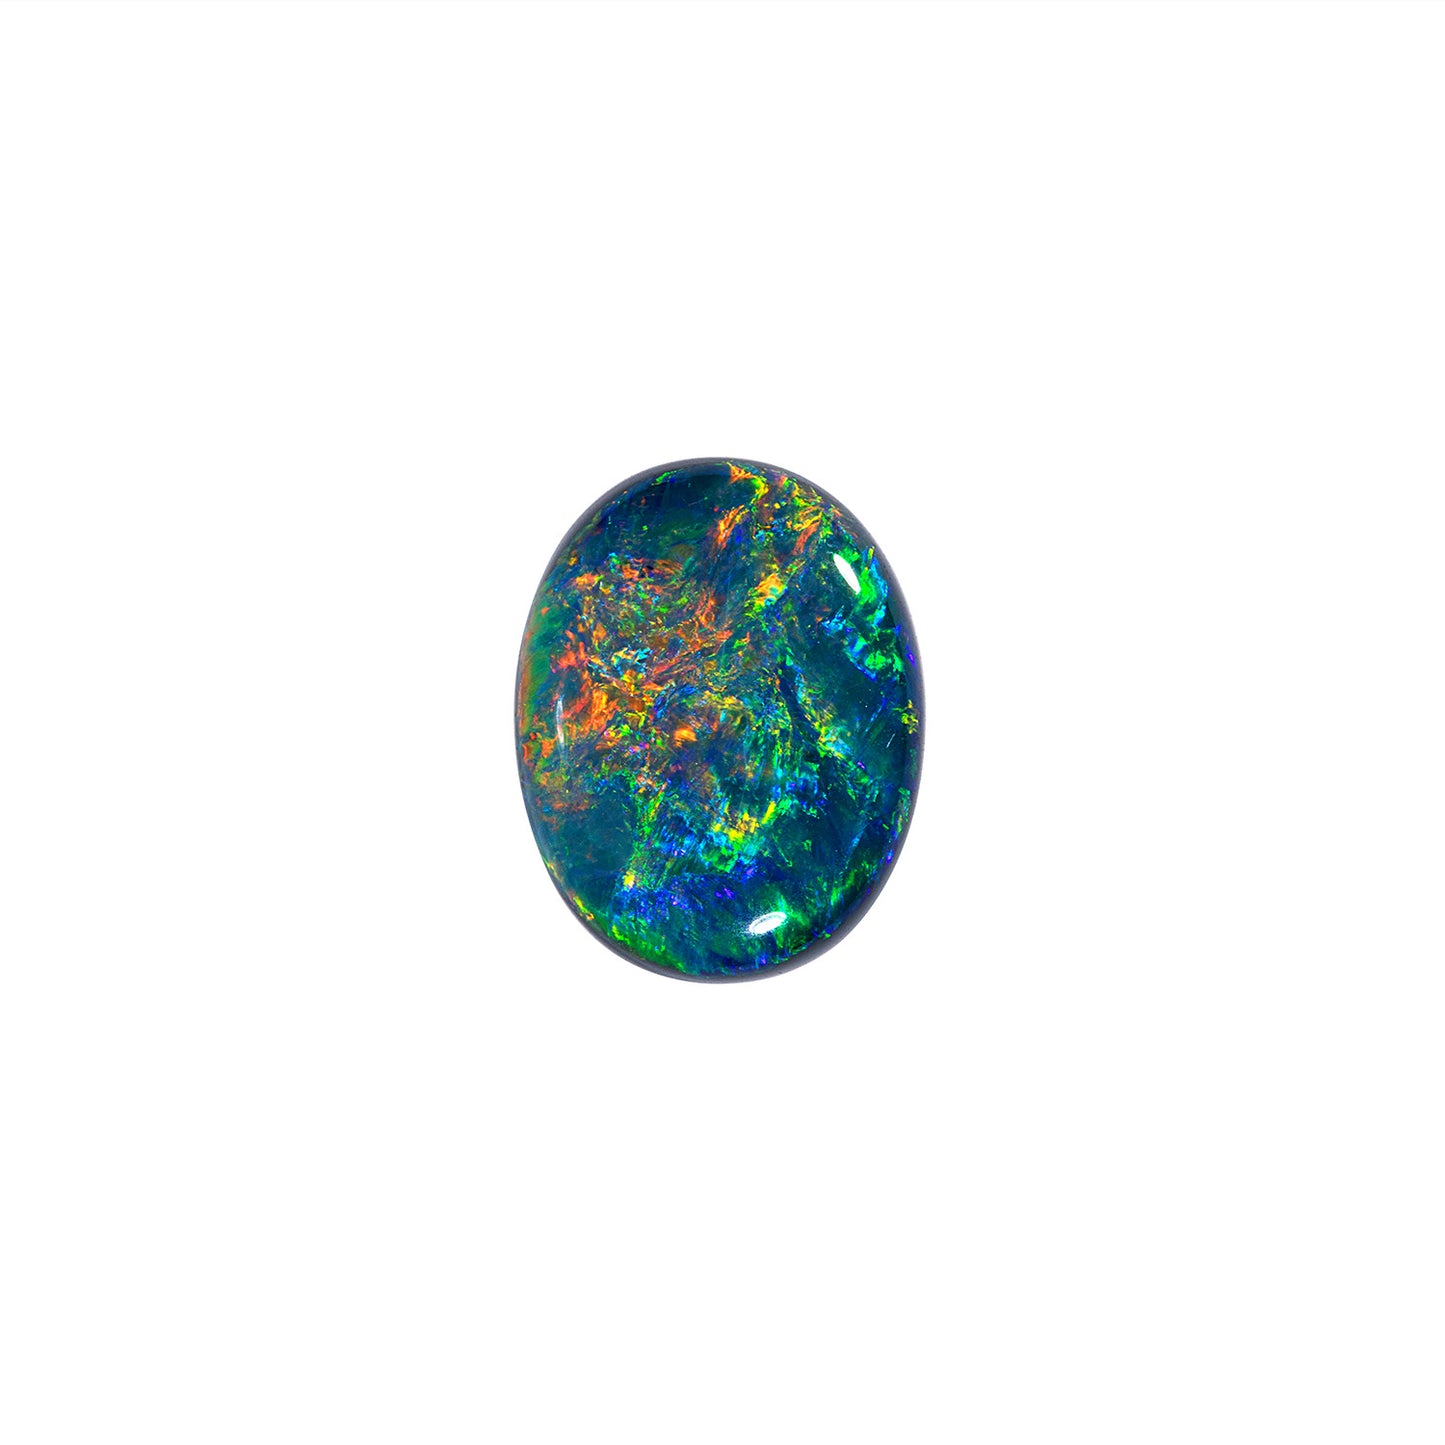 Gem quality 5.44 carat Australian black opal with vibrant red, orange embers, and ocean blue hues. Ideal for a striking cocktail ring or a dream pendant.